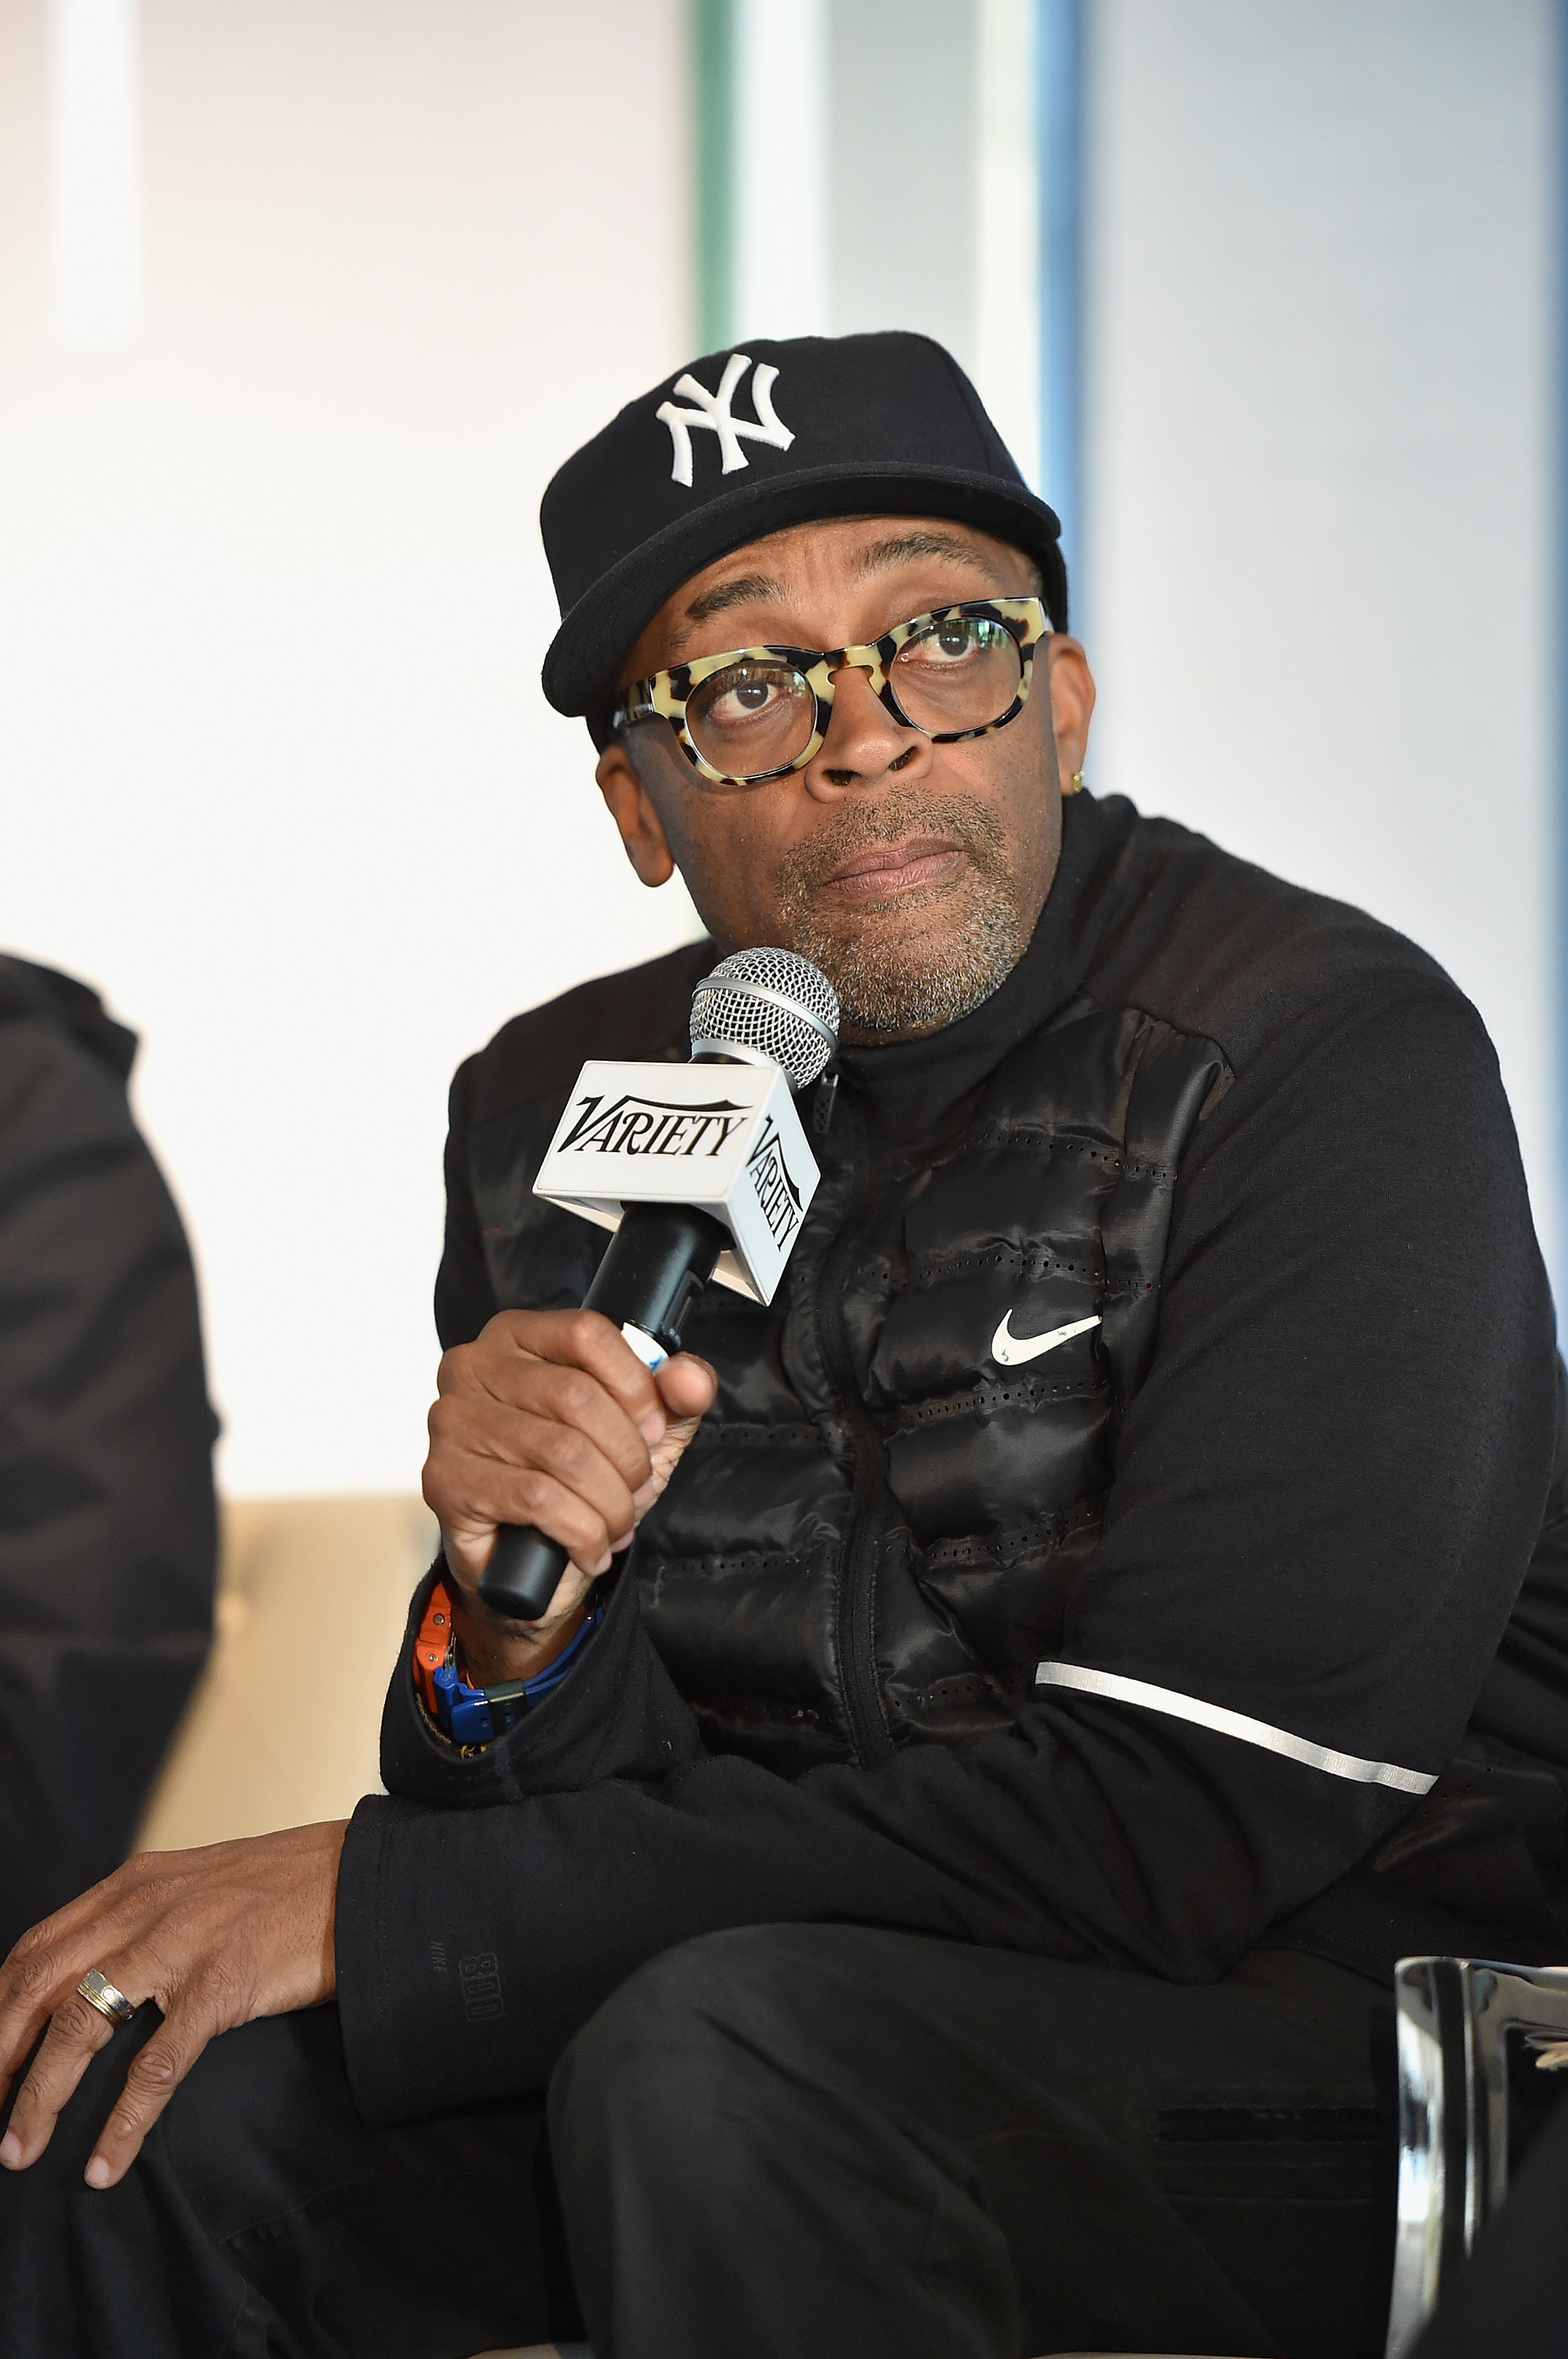 Filmmaker Spike Lee speaks onstage at Variety's Entertainment and Technology Summit NYC at Le Parker Meridien on April 30, 2015 in New York City. (Mike Coppola&mdash;Getty Images)